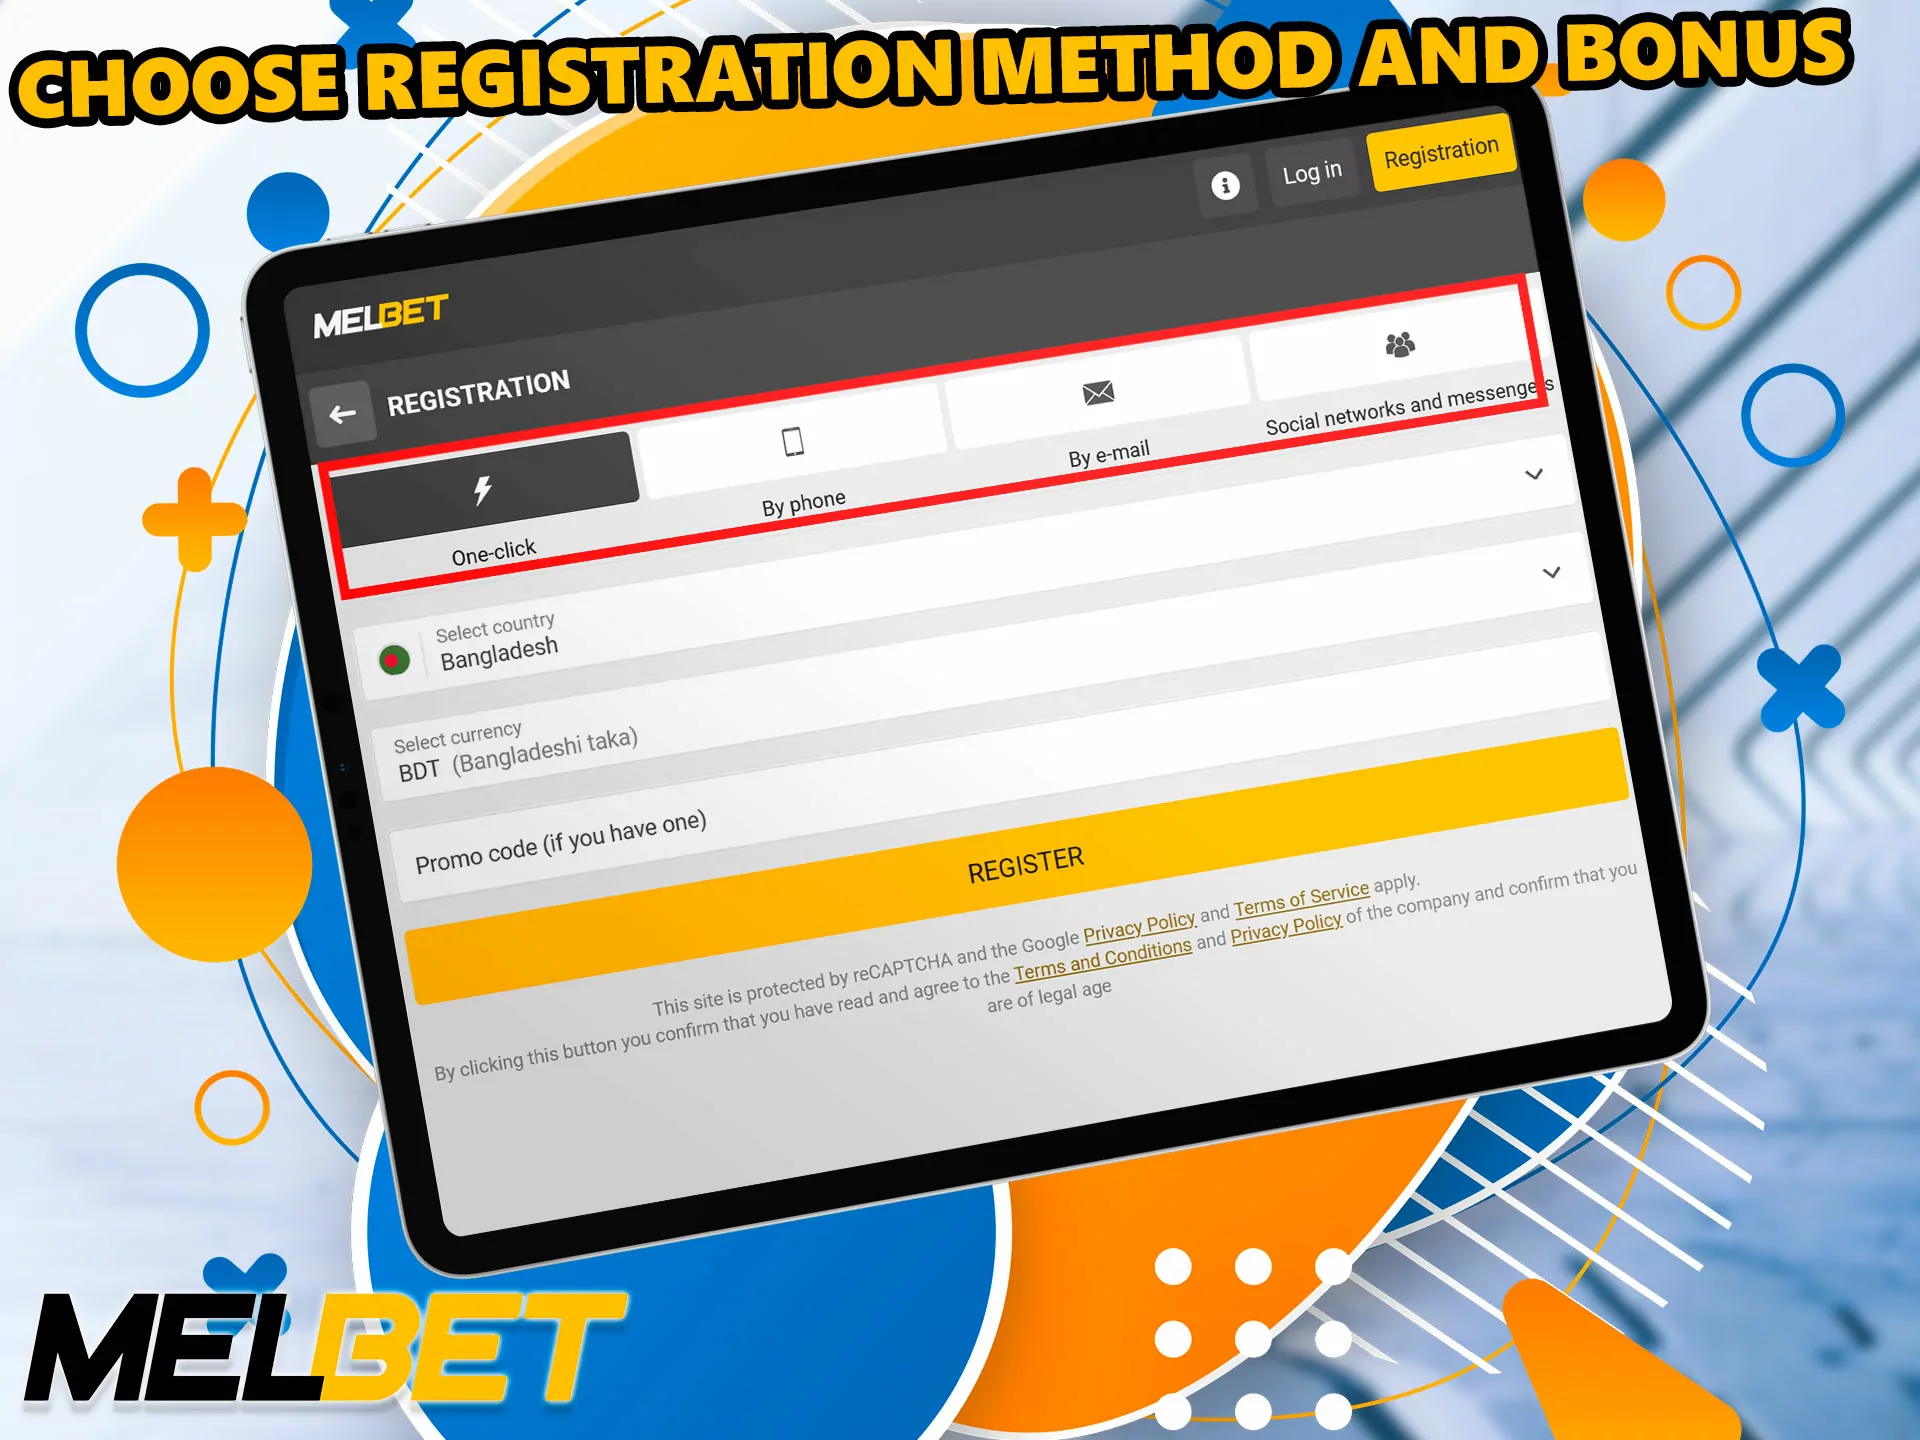 The next step is to choose a convenient registration option that suits you.